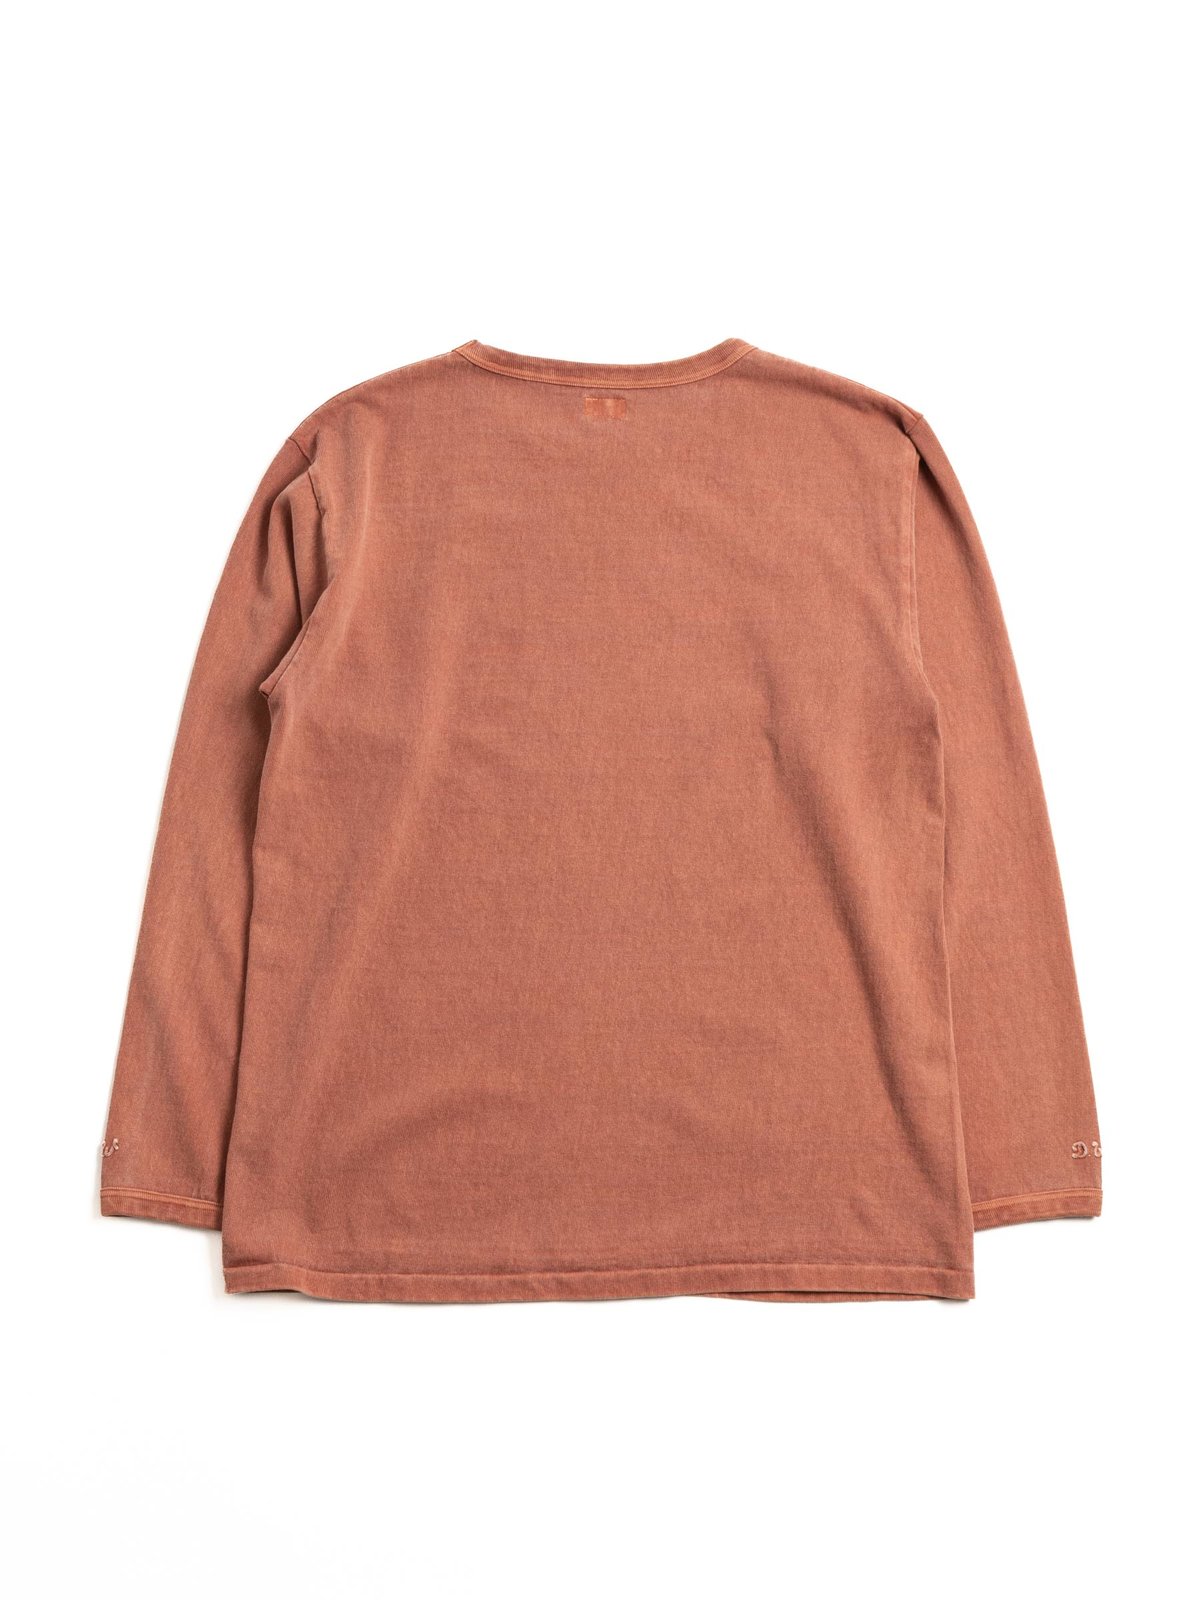 HEAVY WEIGHT PIGMENT DYED L/S TEE BRICK RED - Image 4